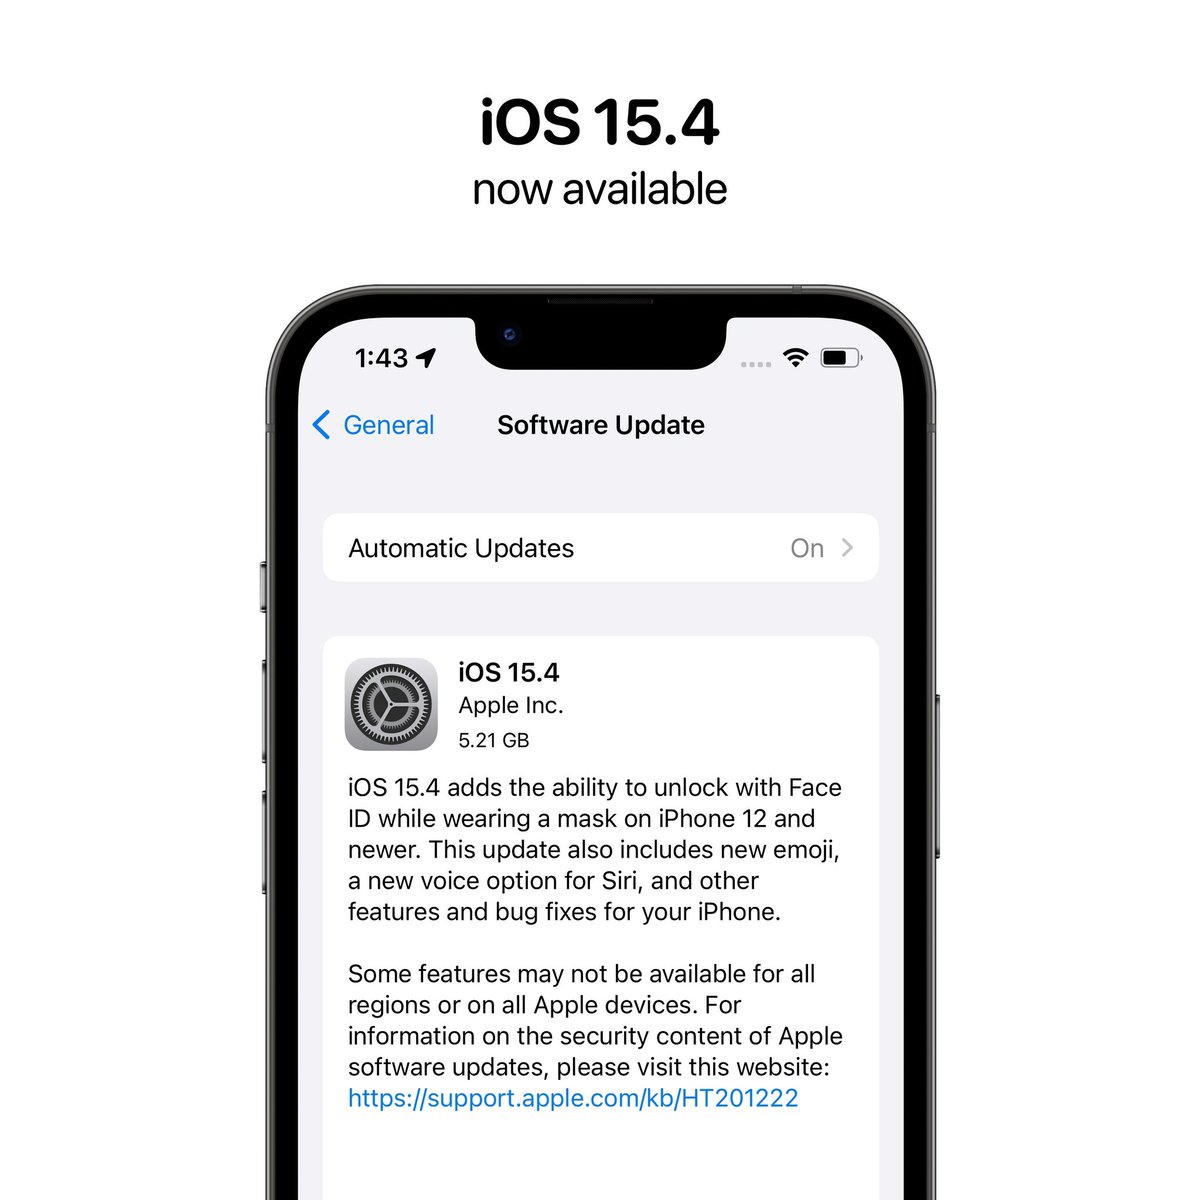 Apple has released iOS 15.4 featuring support for Face ID while wearing a mask (iPhone 12 and newer), new emoji, and more. The update is available now for all supported devices 

#iOS154 #iOS15 #IOS2022 #ios15_4 #IosUpdate #Apple